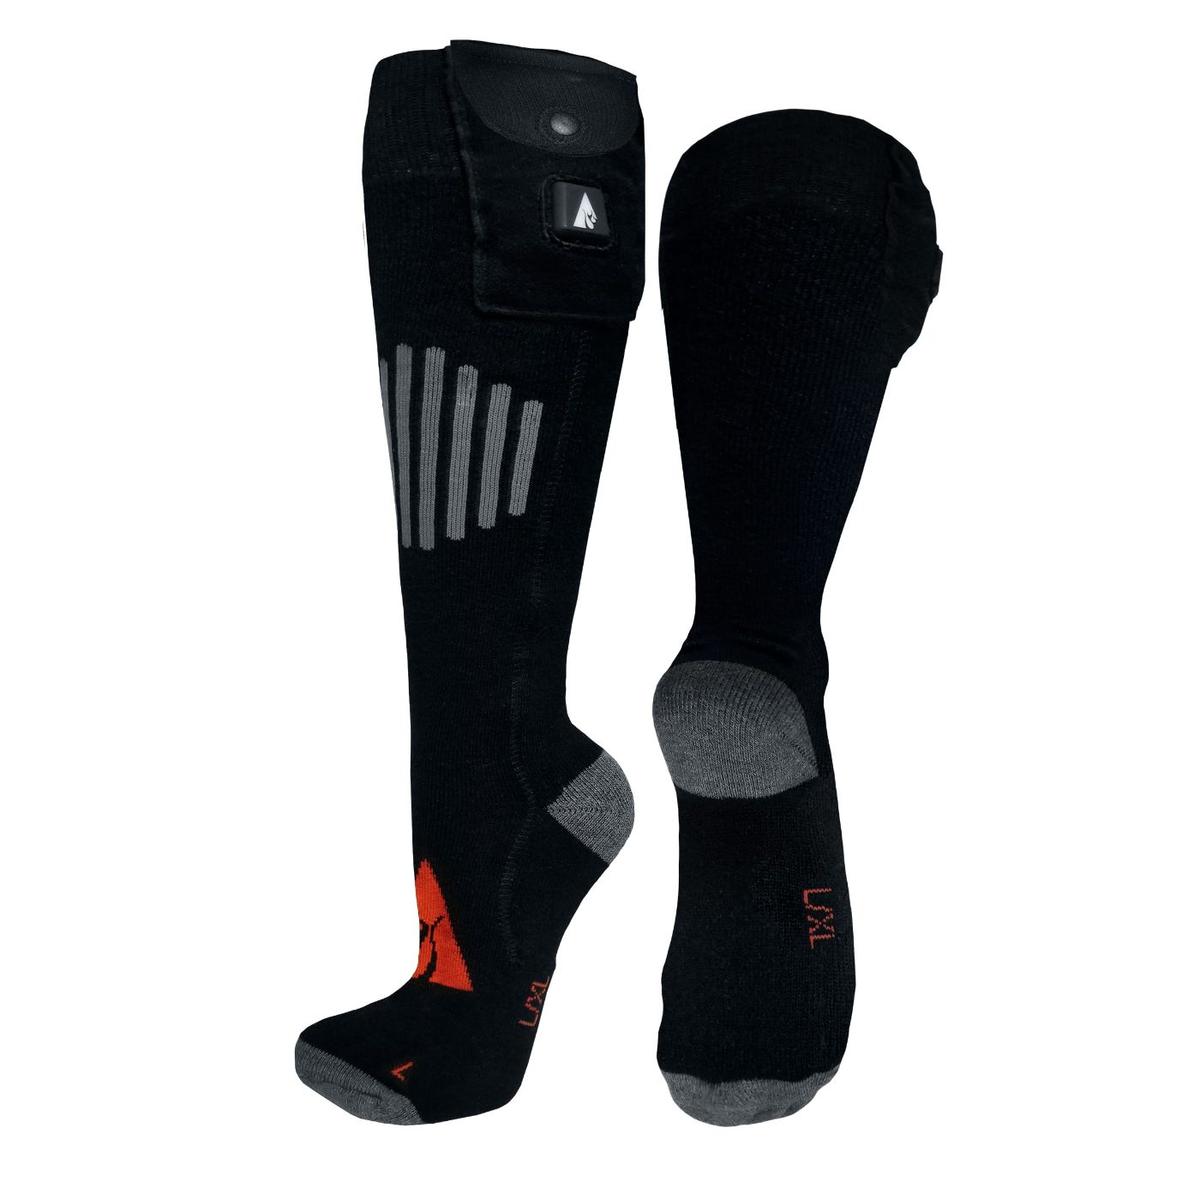 ActionHeat 5V Wool Battery Heated Socks - Replacement Socks Only - Front